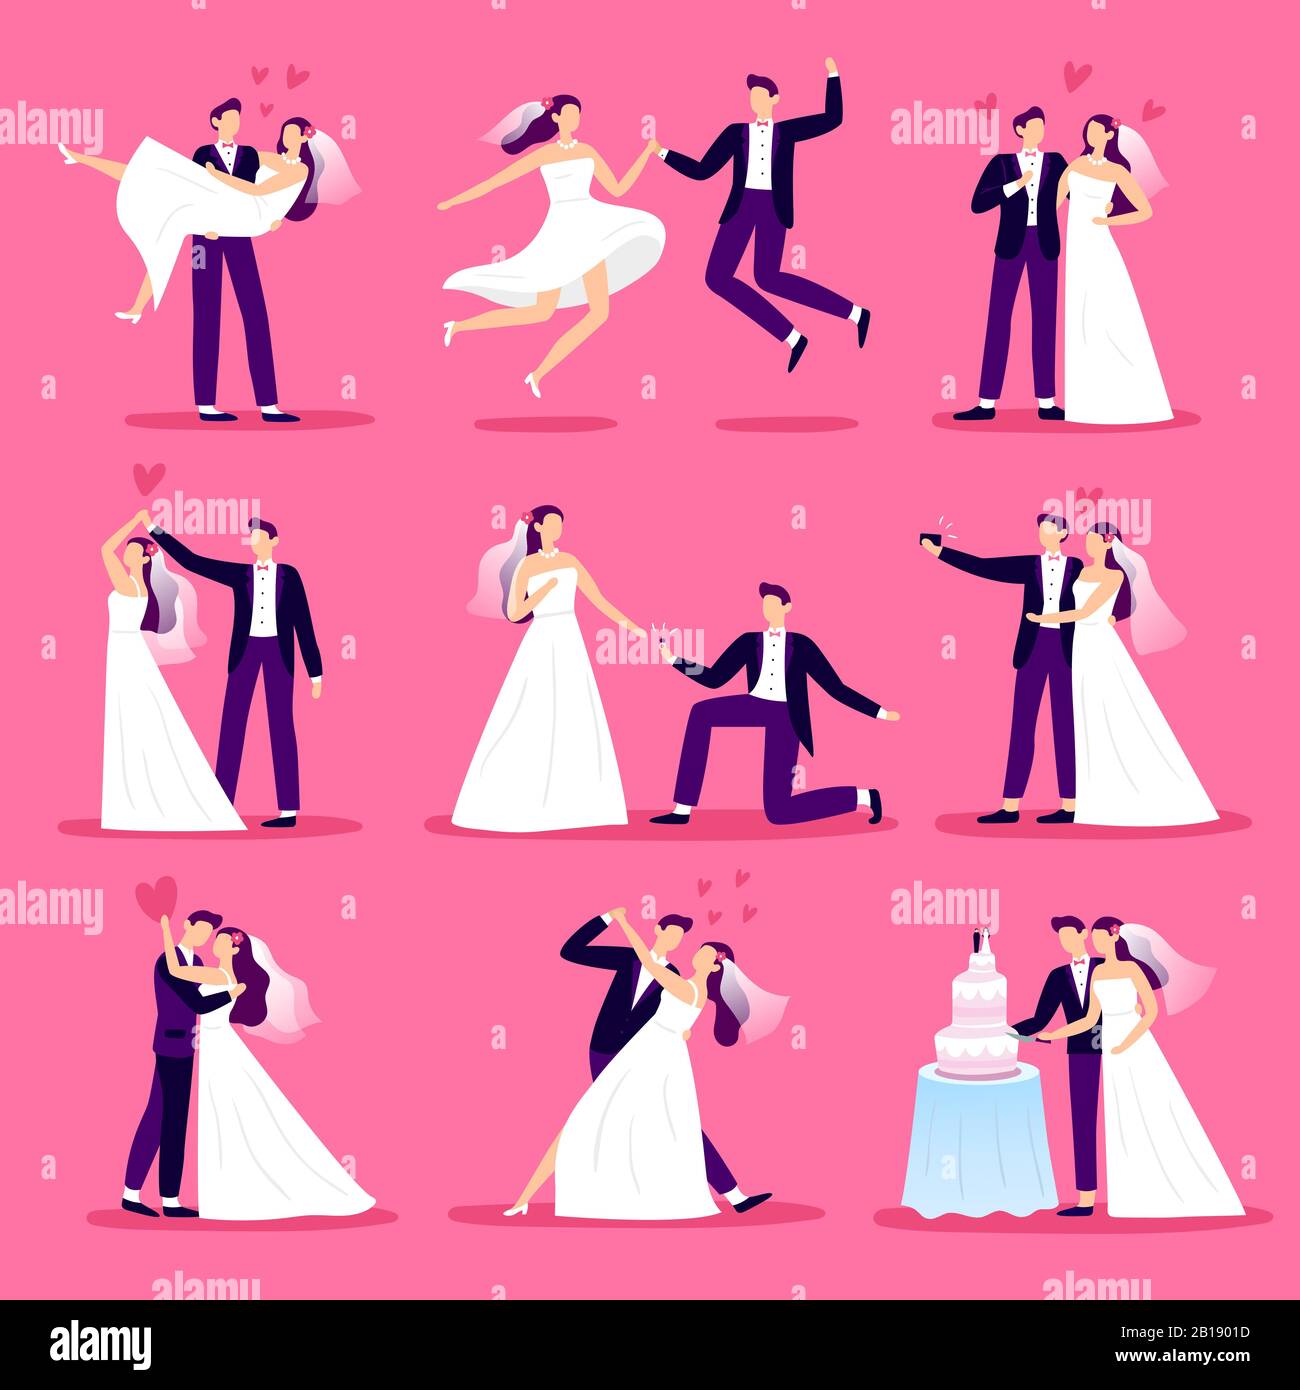 Marriage couple. Just married couples, wedding dancing and weddings celebration. Newlywed bride and groom vector illustration set Stock Vector